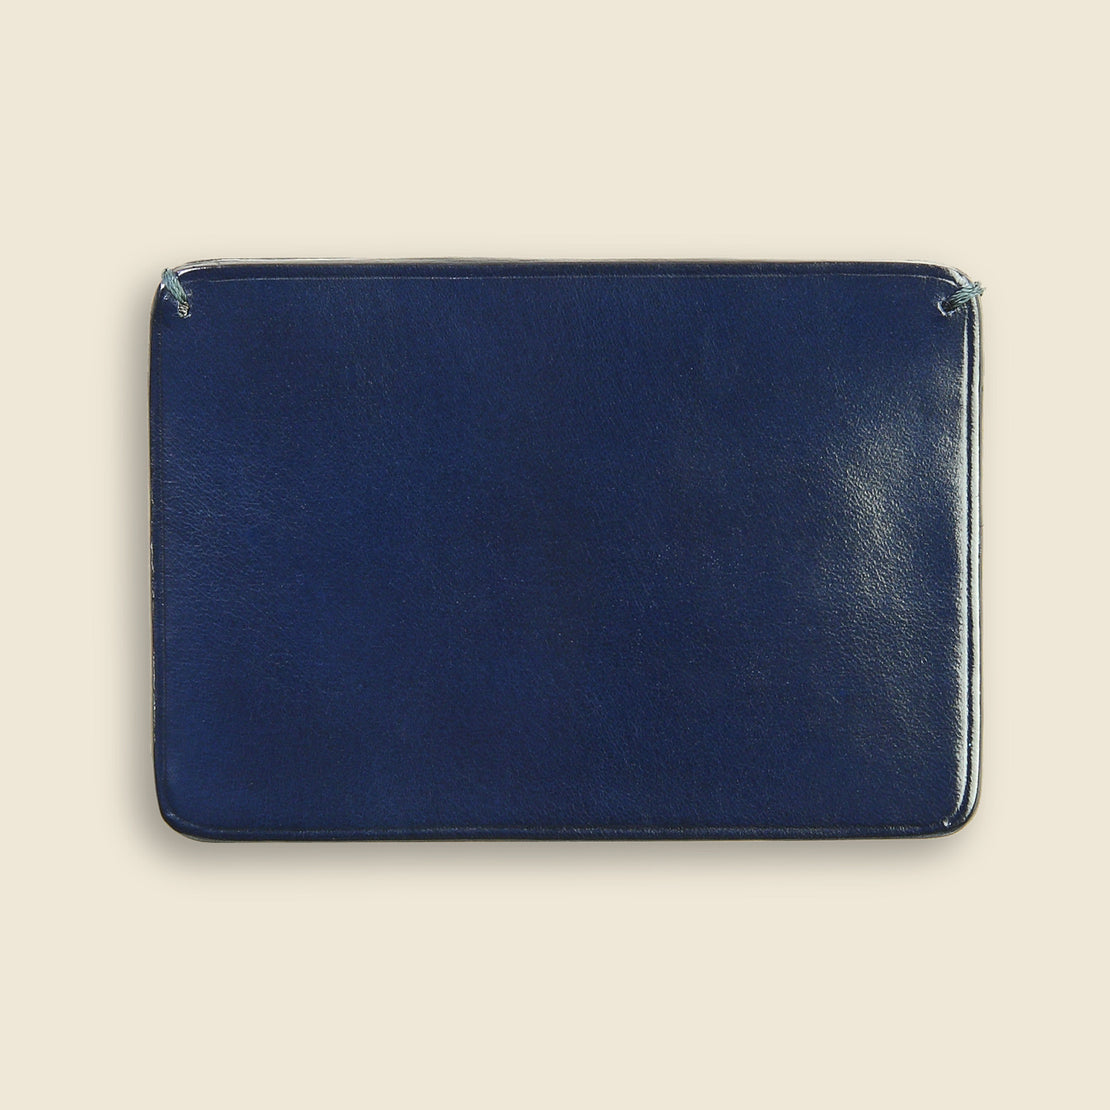 Credit Card Case - Navy - Il Bussetto - STAG Provisions - Accessories - Wallets